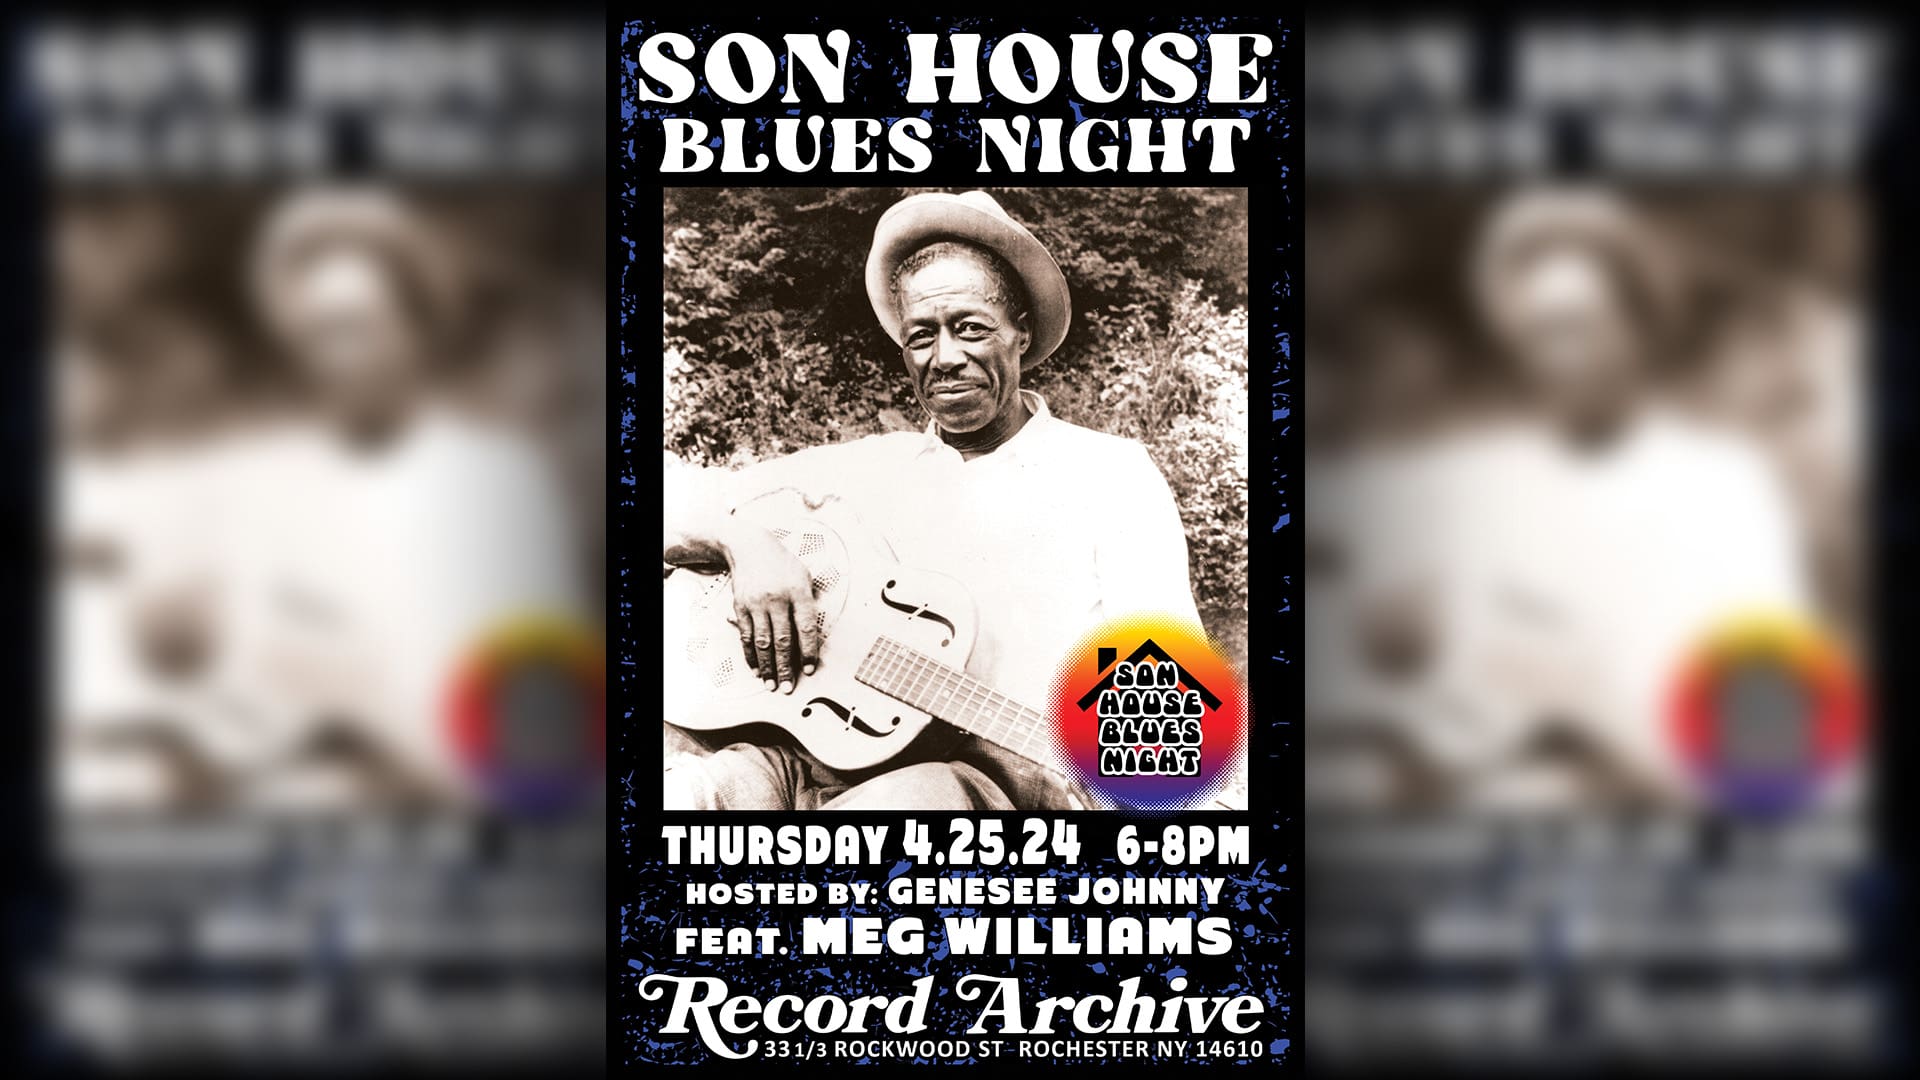 Son House Blues Night. Thursday 4.25.24 6-8pm.<br />
Hosted by Genesee Johnny feat. Meg Williams. Record Archive 33 1/3 Rockwood St Rochester NY 14610